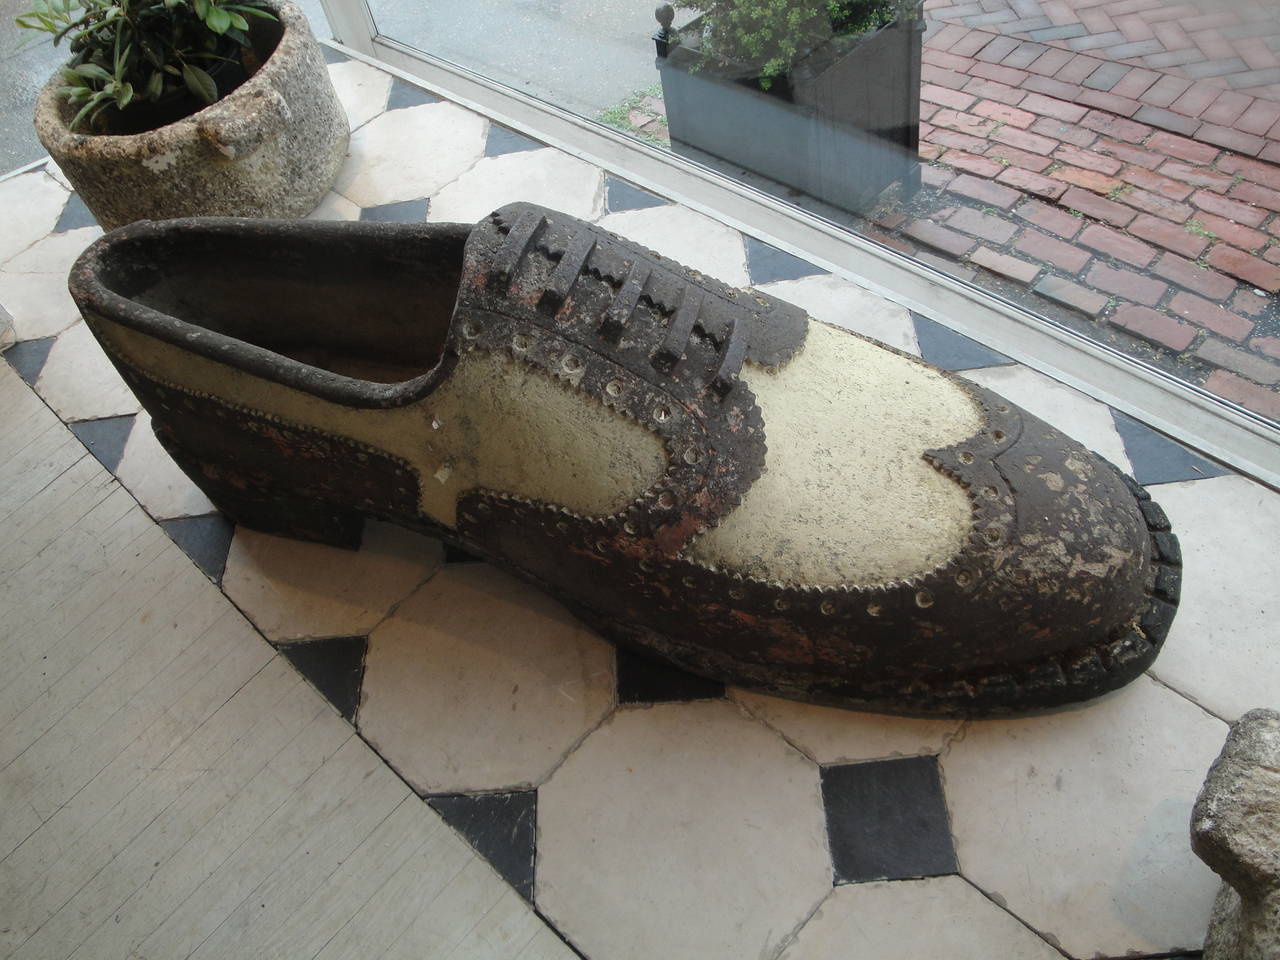 19th century French wing-tip shoe in concrete.